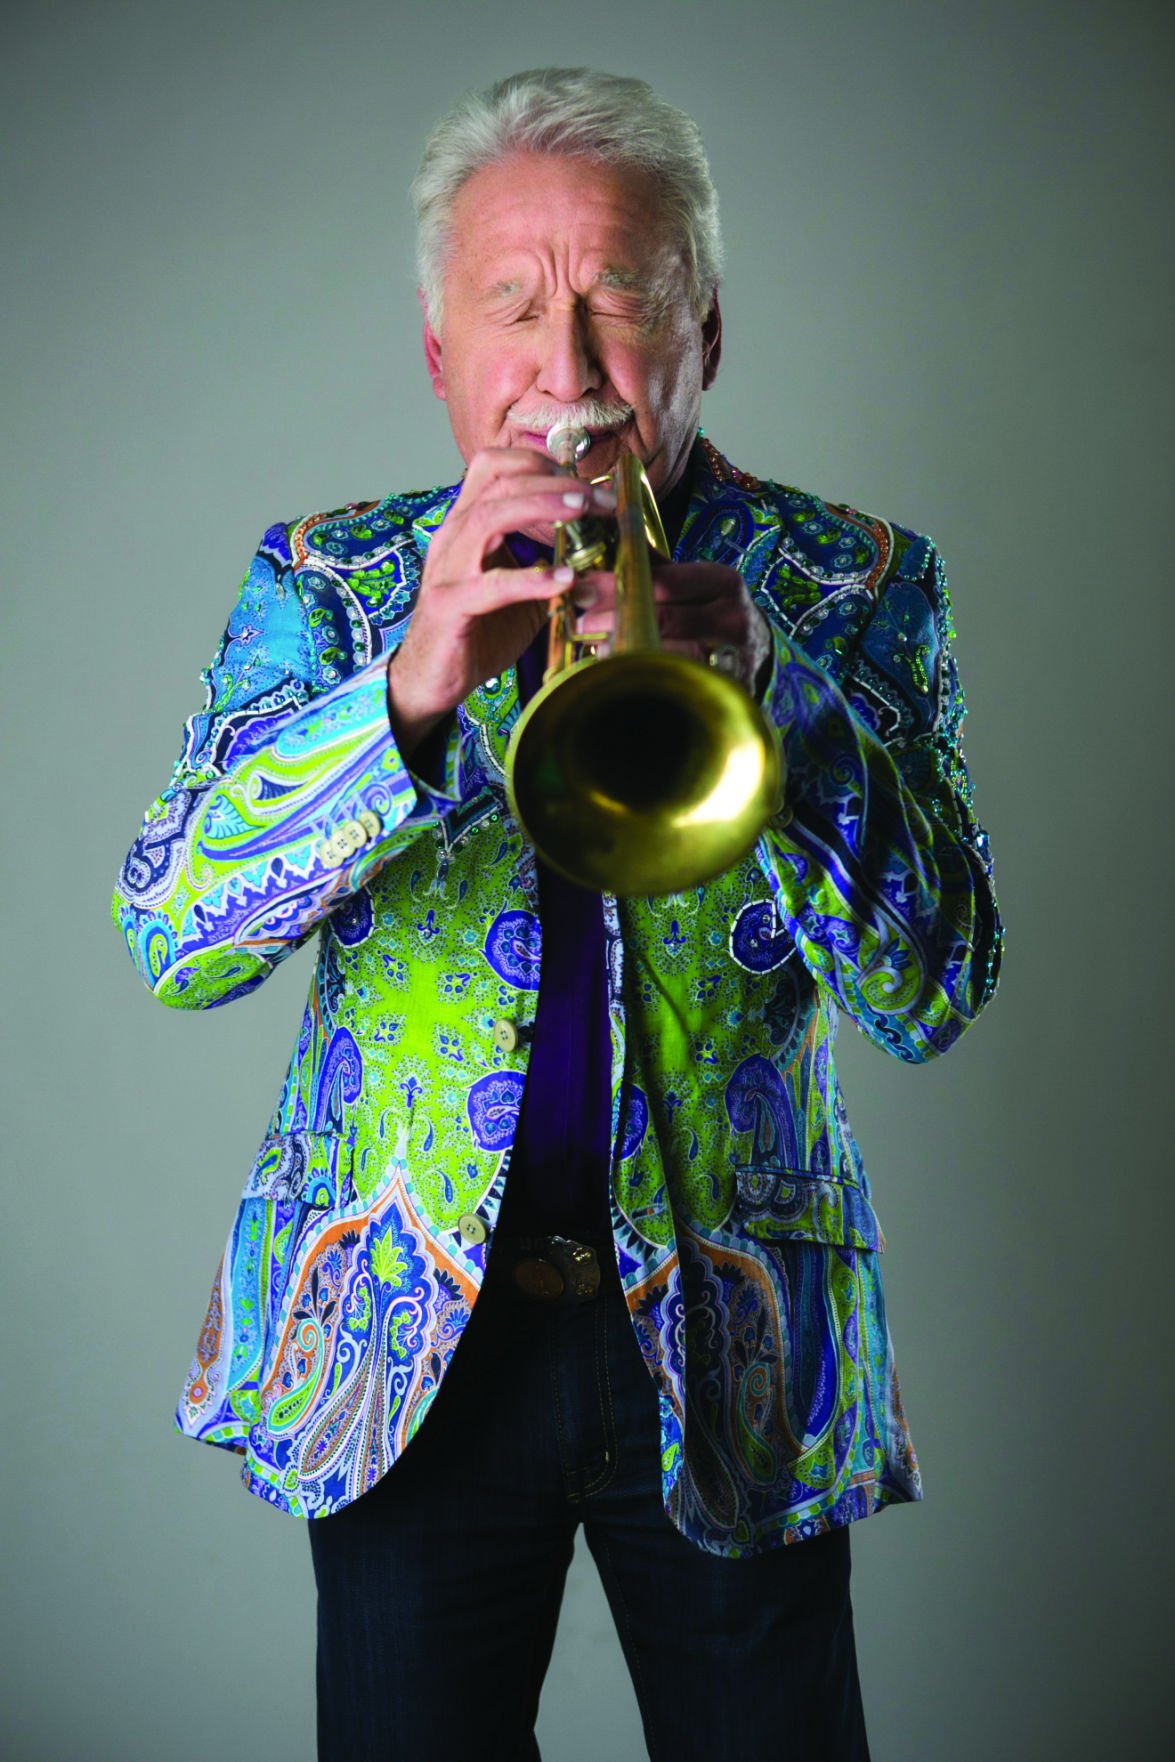 Review: Doc Severinsen doesn't let age slow him down